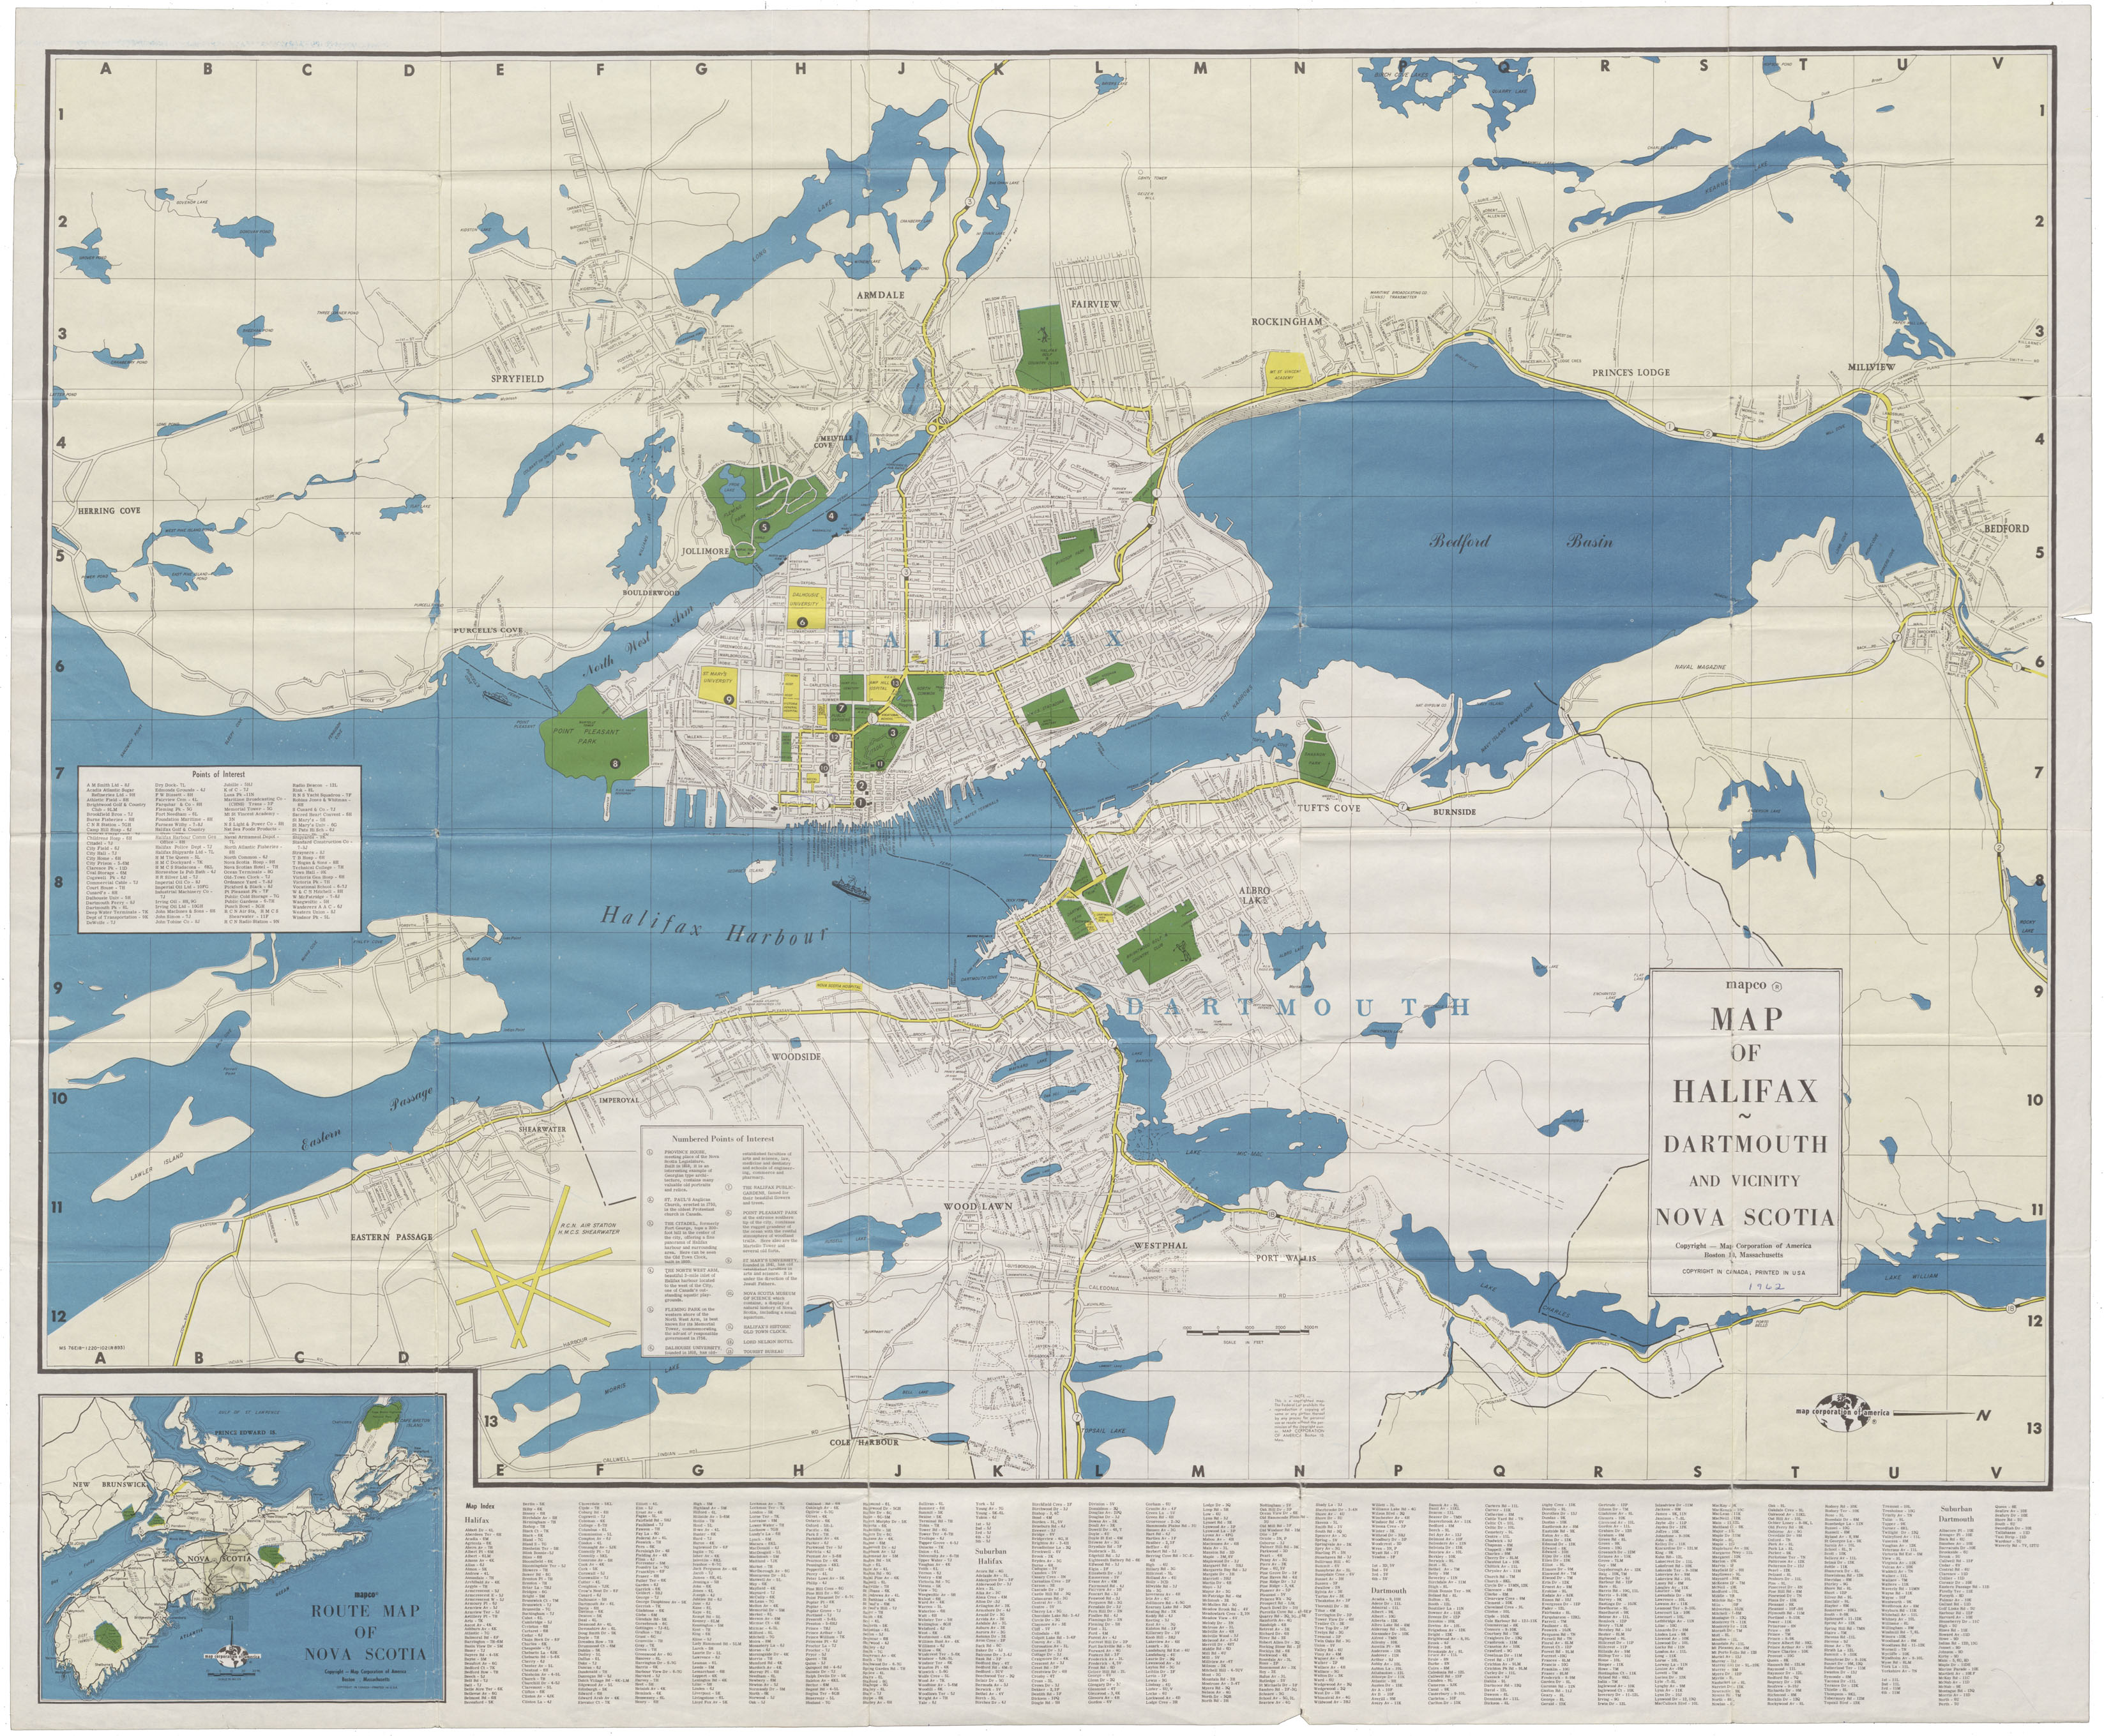 Map of Halifax, Dartmouth and Vicinity